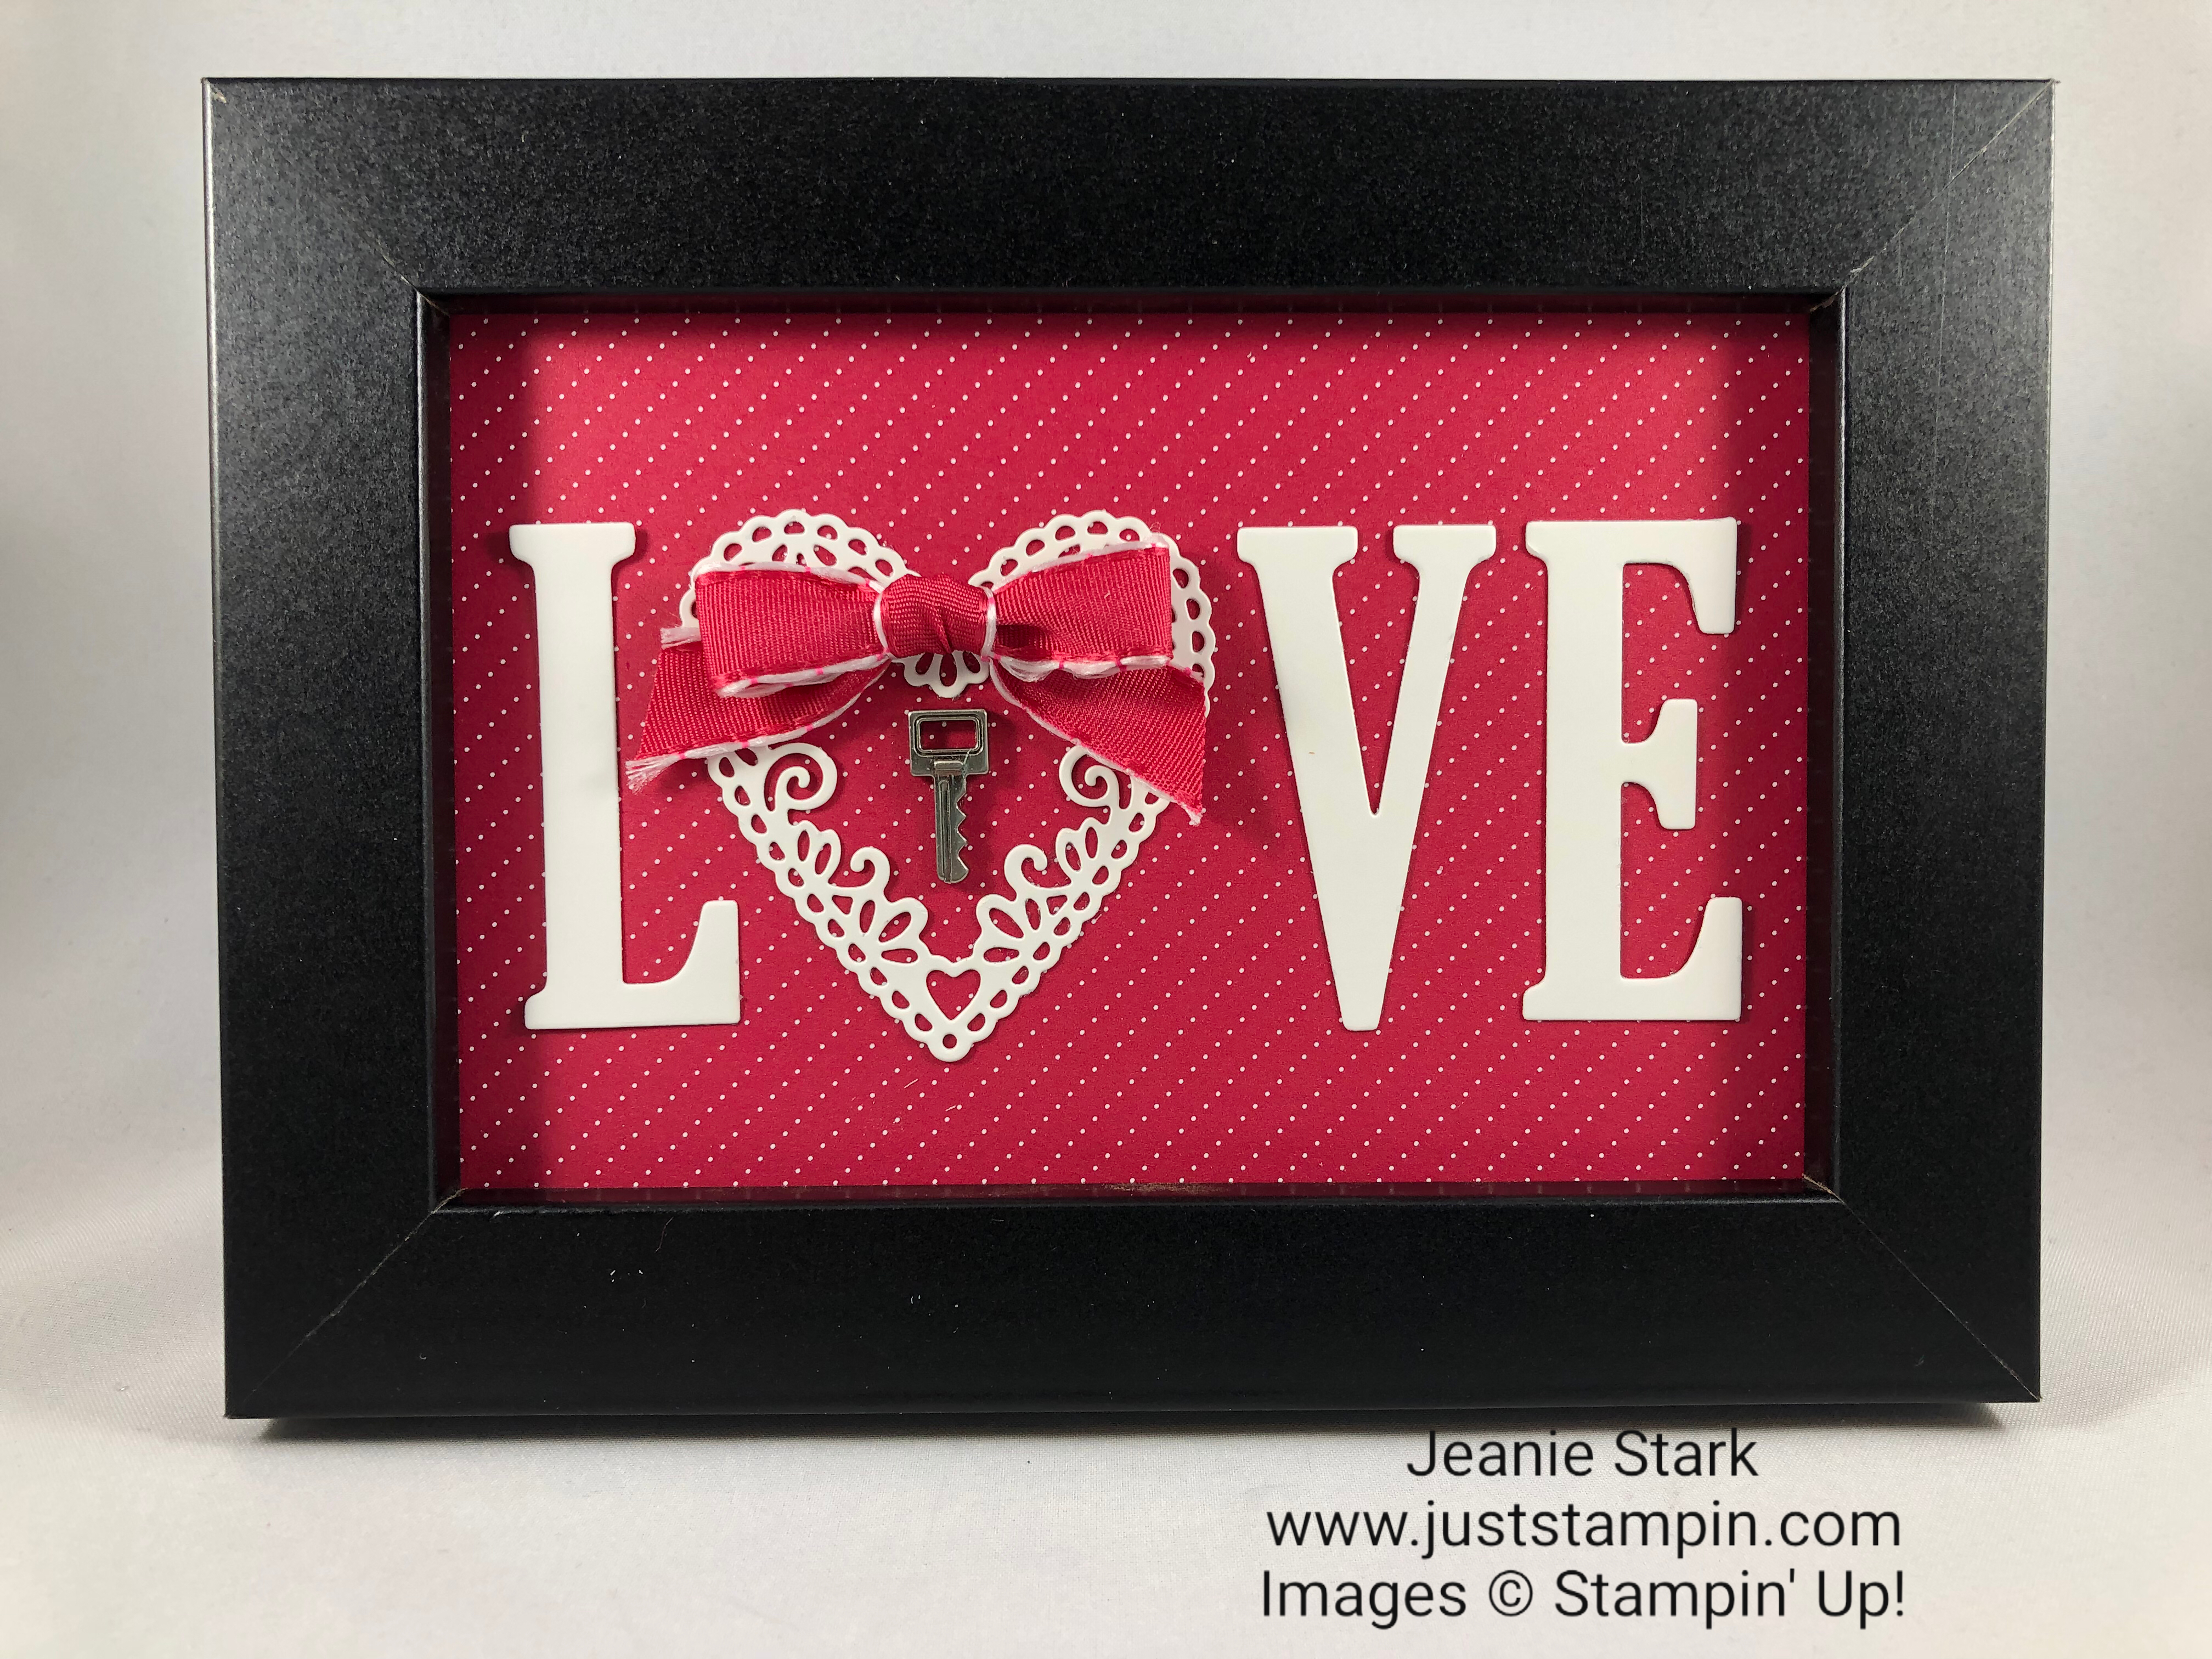 Stampin Up Large Letter Framelits and Be Mine Stitched Framelits Dies Framed Art Gift Ideas for Valentine's Day, Wedding, or Anniversary - Jeanie Stark StampinUp